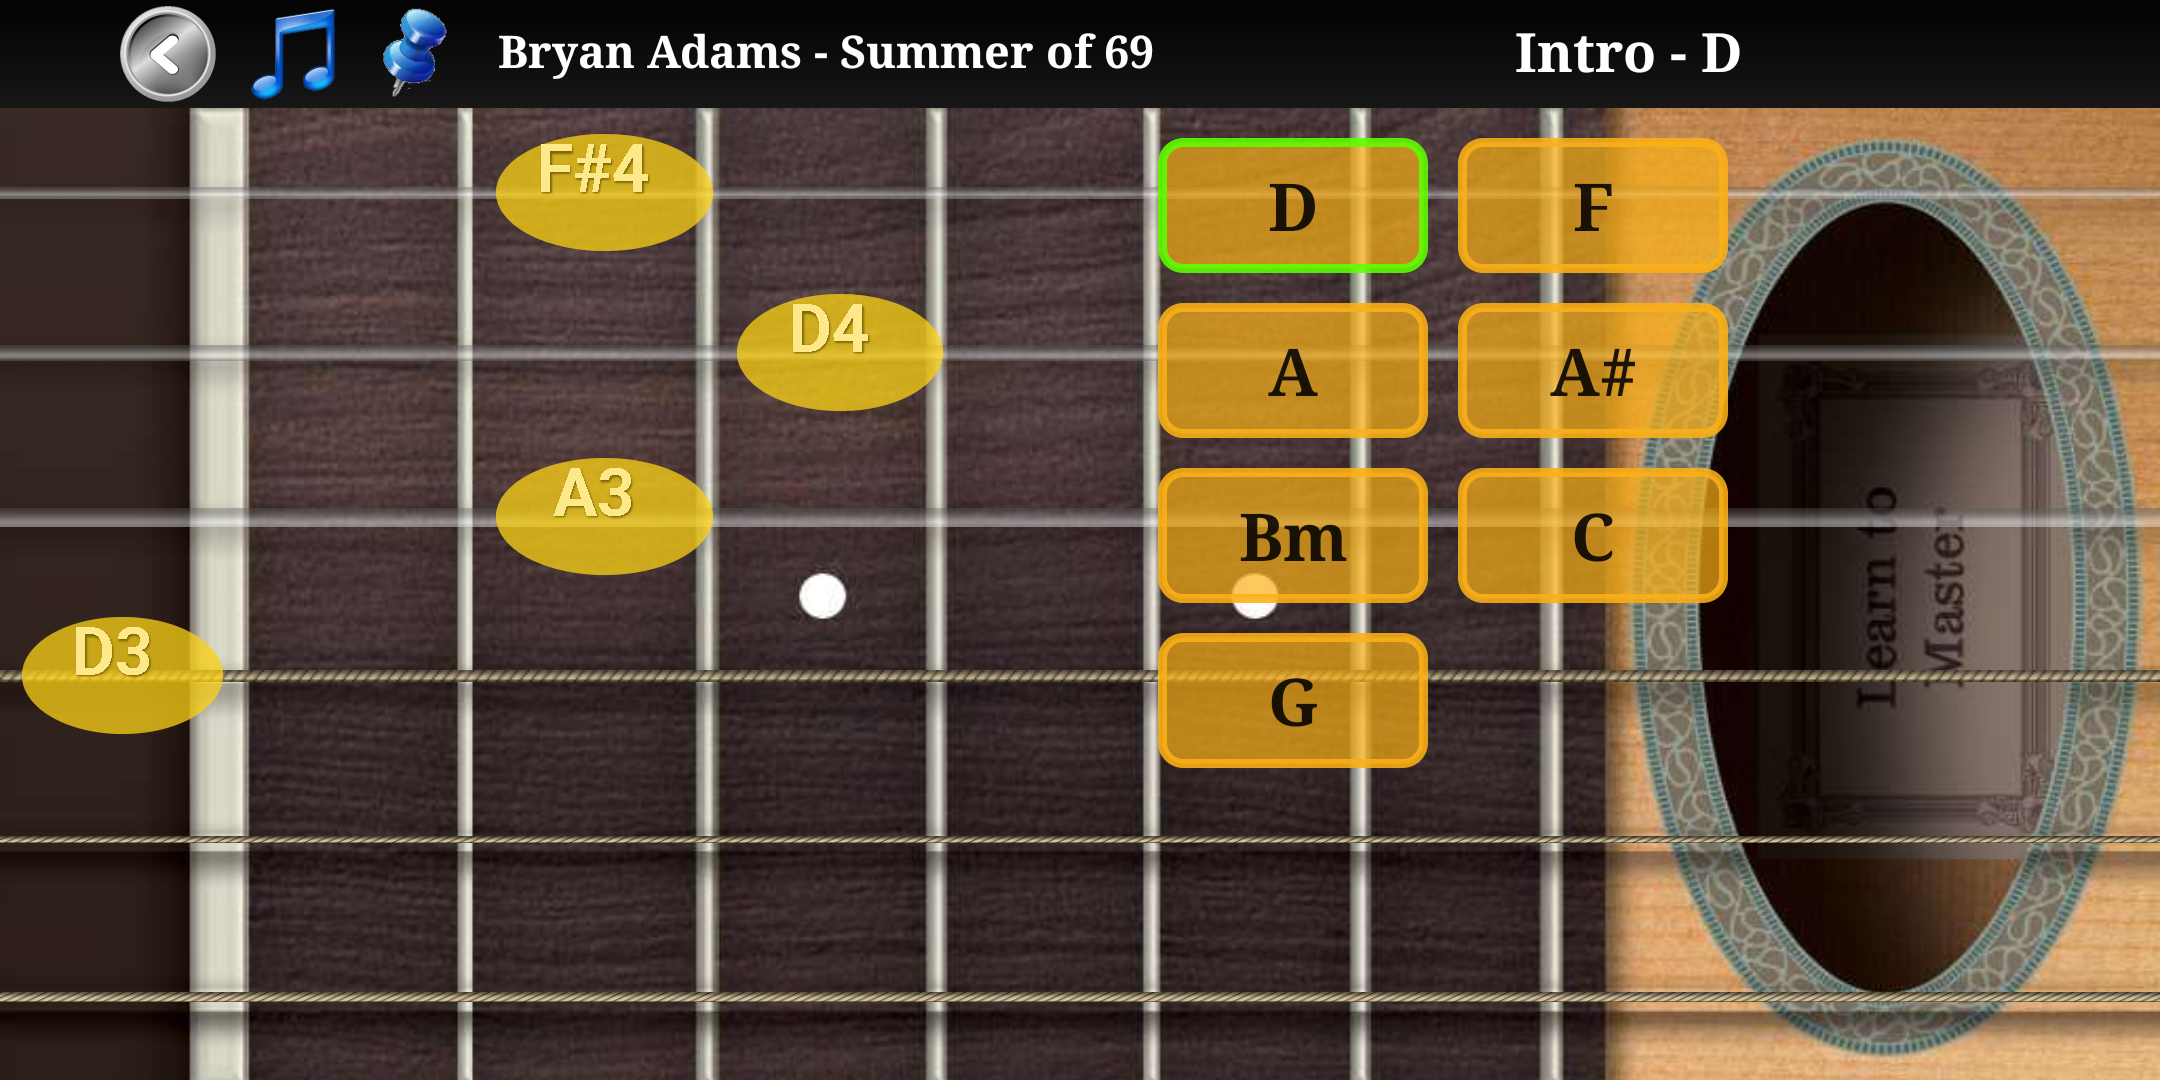 Android application Guitar Scales & Chords Pro screenshort